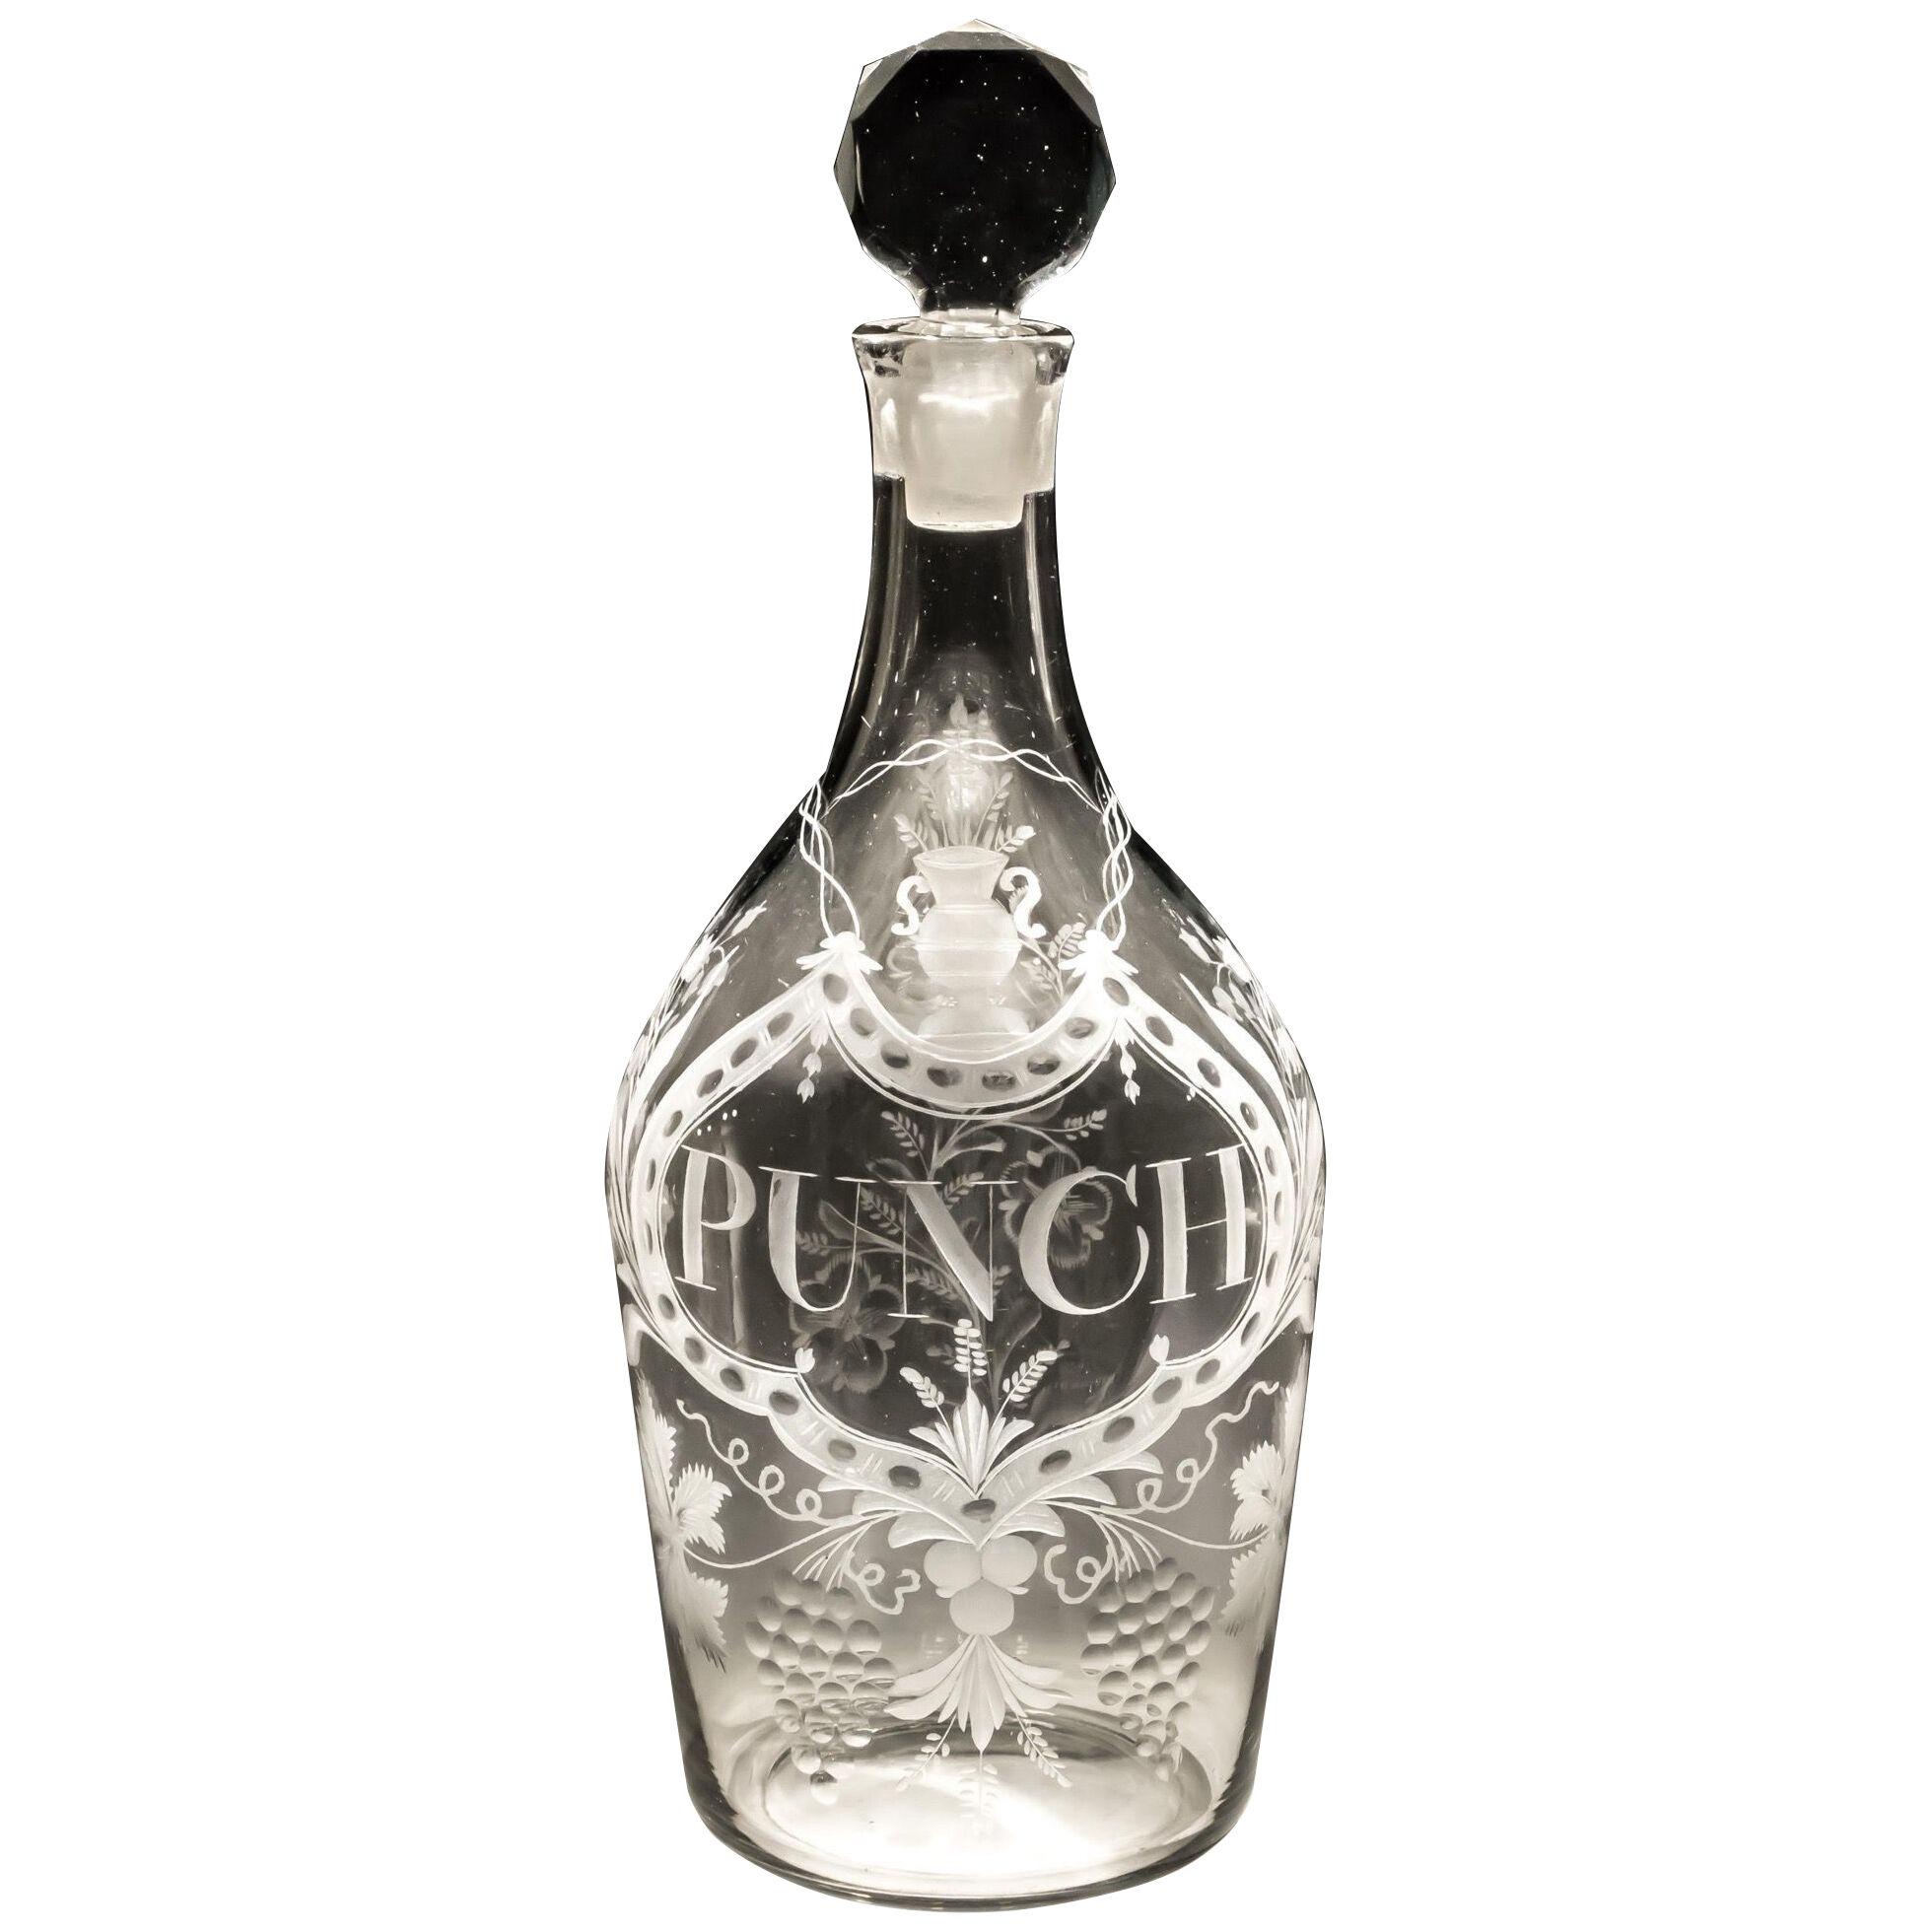 A GEORGE III CUT & ENGRAVED GLASS JEROBOAM PUNCH DECANTER